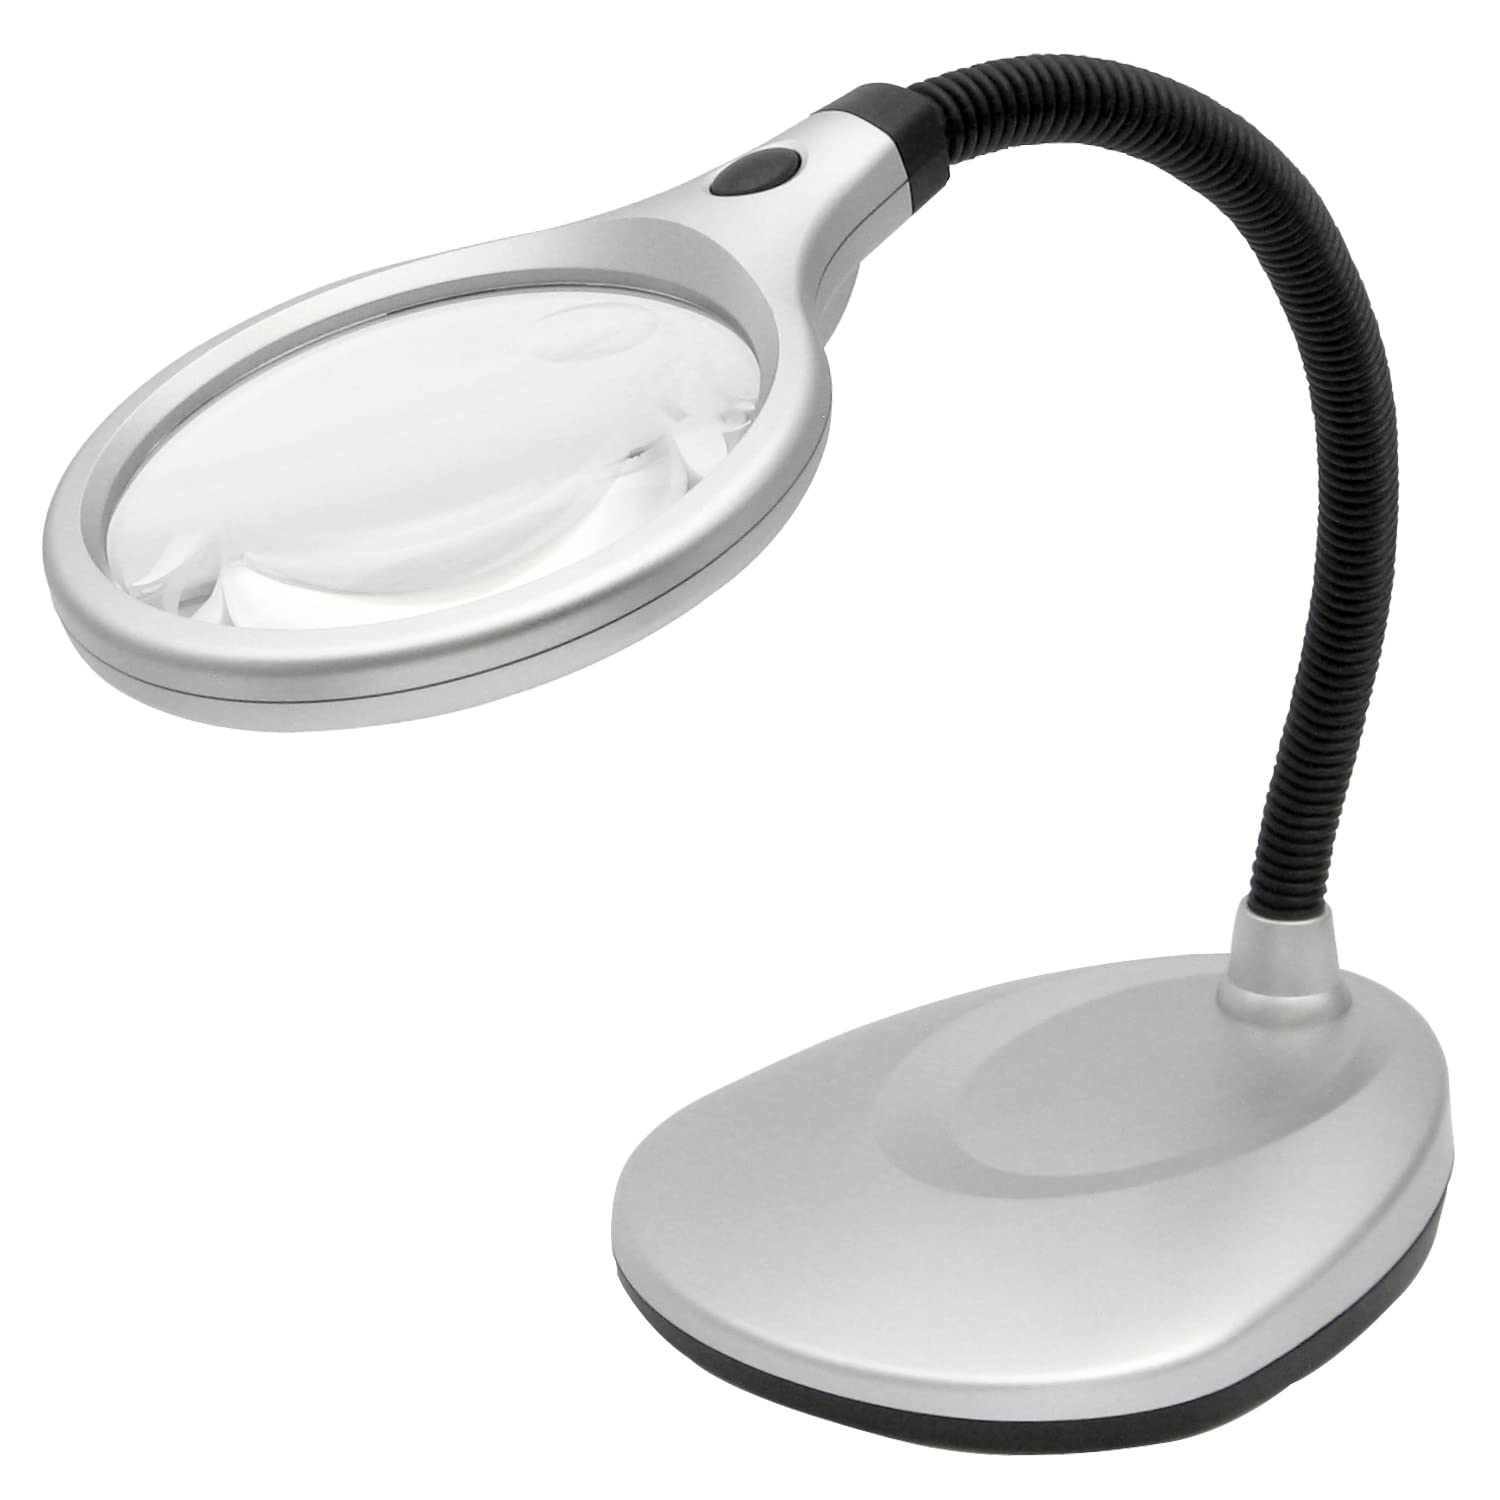 Engineer SL-23 2X LED Magnifier w/ 2 Lights Battery Operated